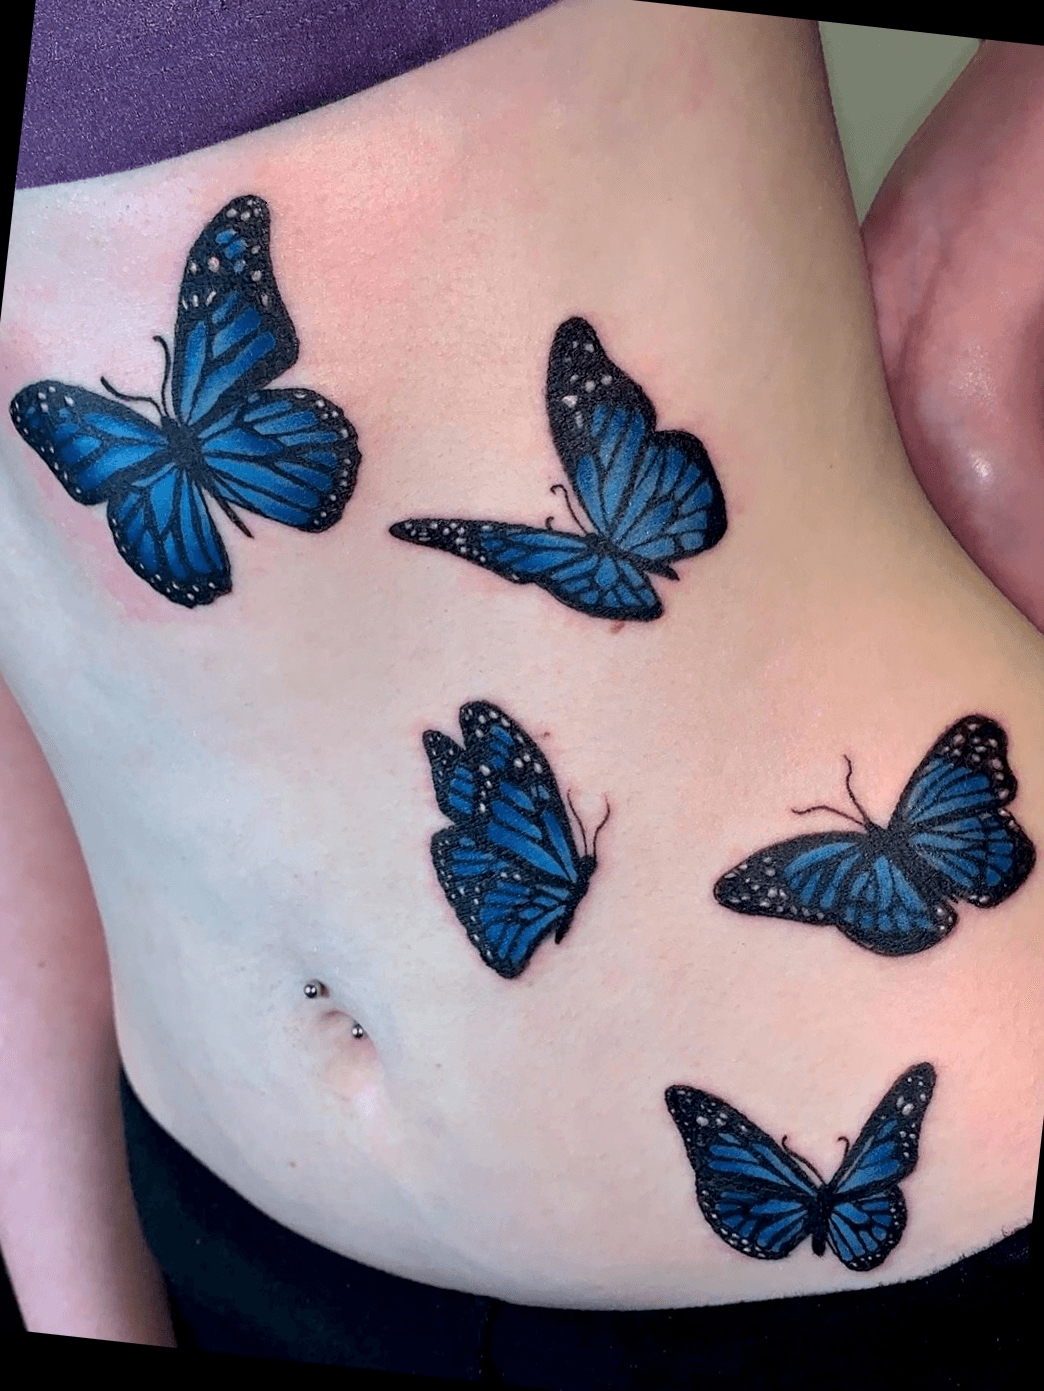 THE BUTTERFLY PROJECT on Tumblr